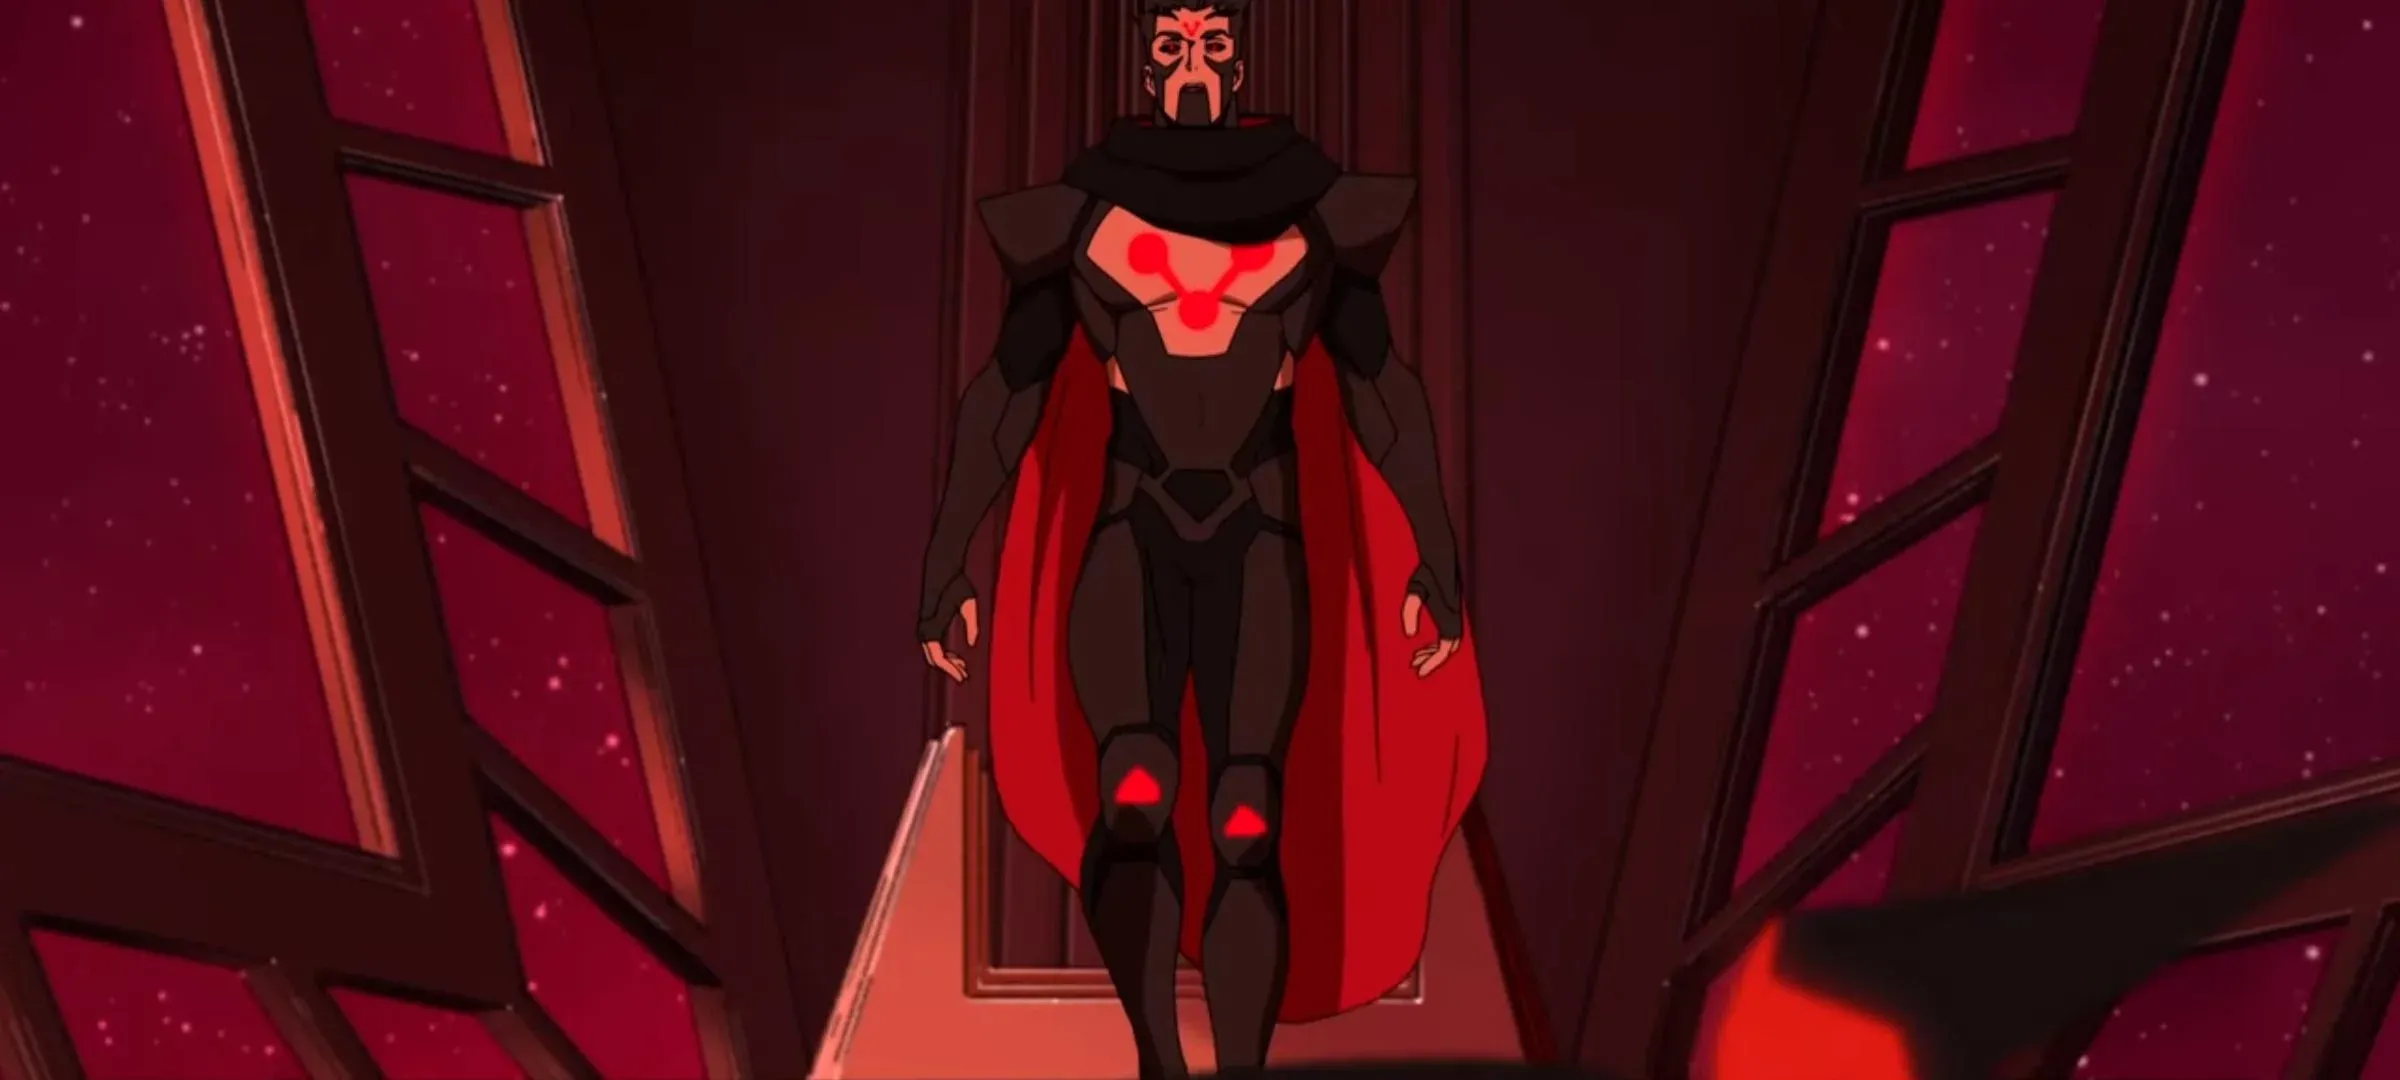 Superman controlled by Brainiac in a new costume from the cartoon My Adventures with Superman. He is in a mostly black costume with his chest exposed. The three connected dots in a V formation to symbolize Brainiac.